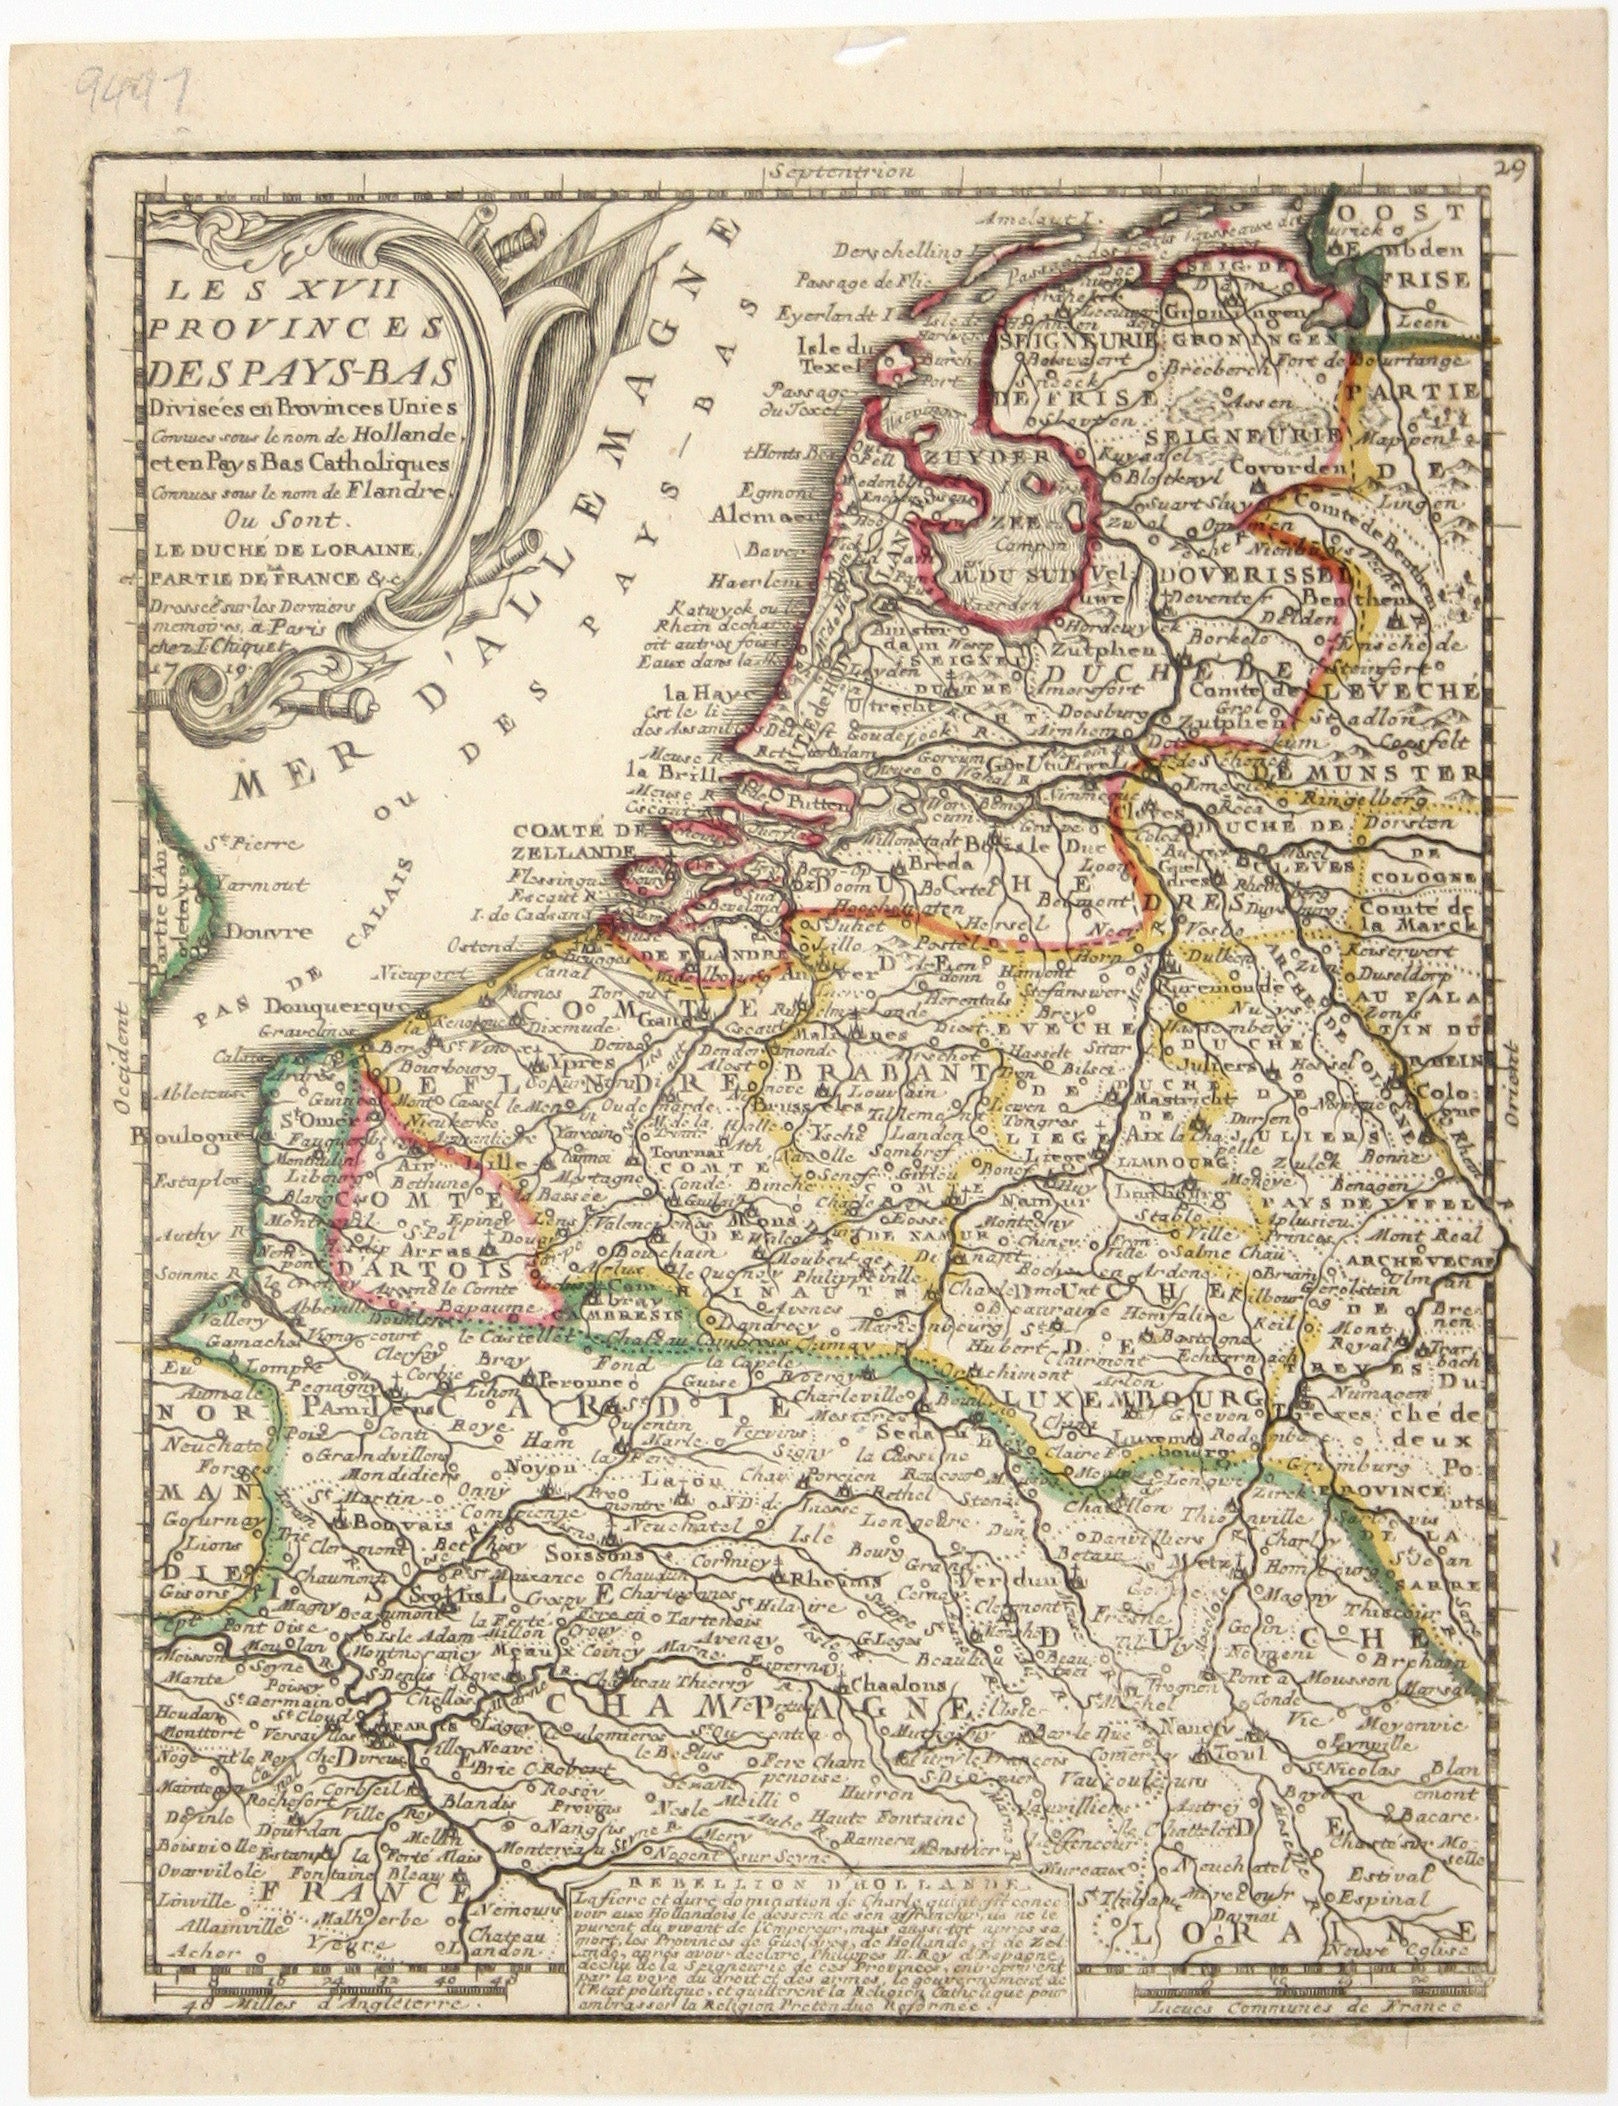 Chiquet’s Map of the Low Countries